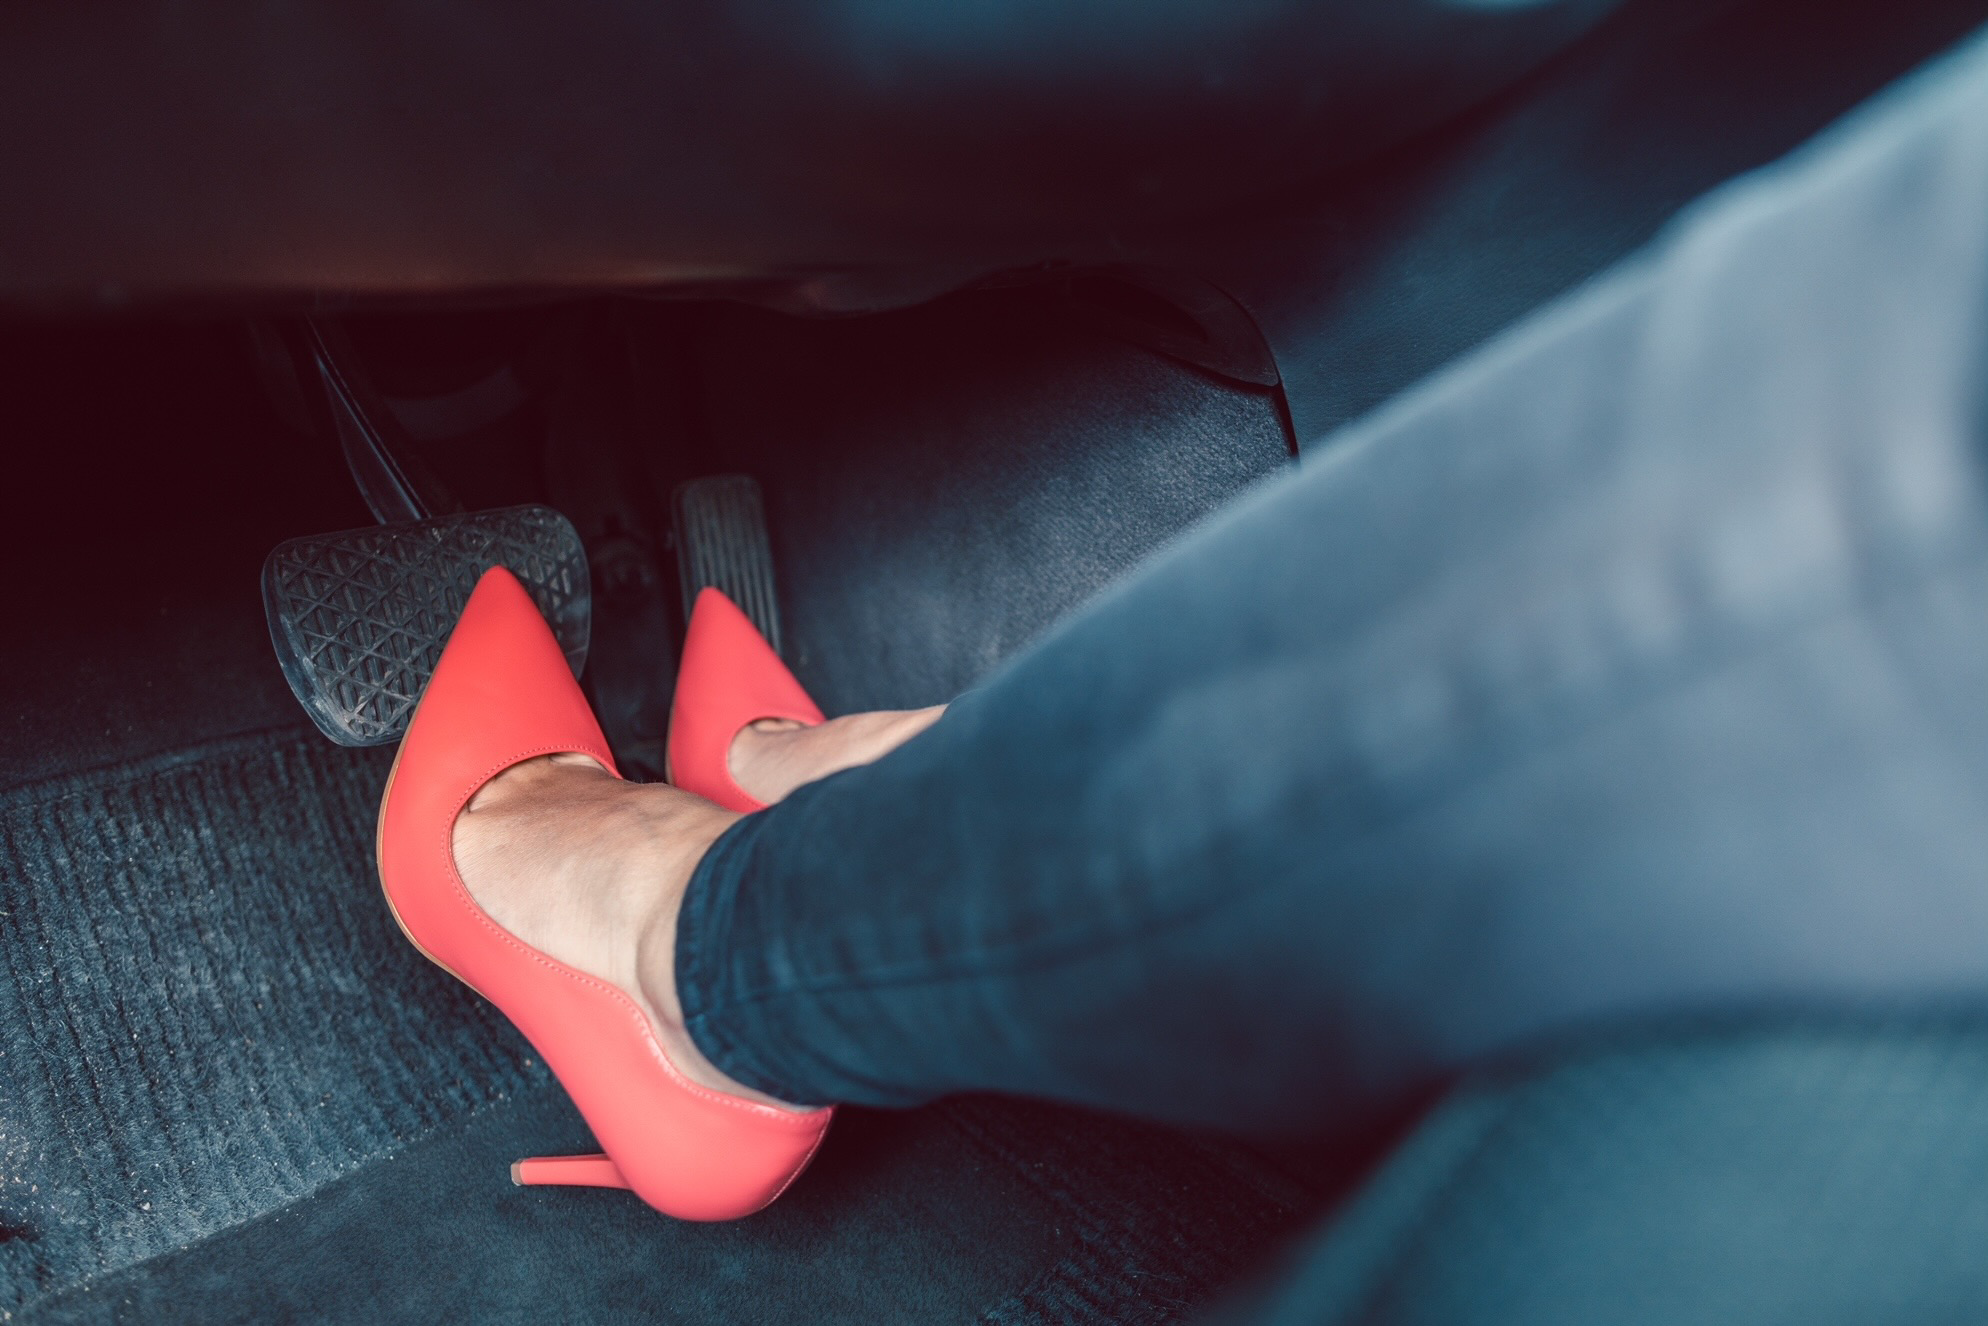 Road safety: If you drive in high heels, read this